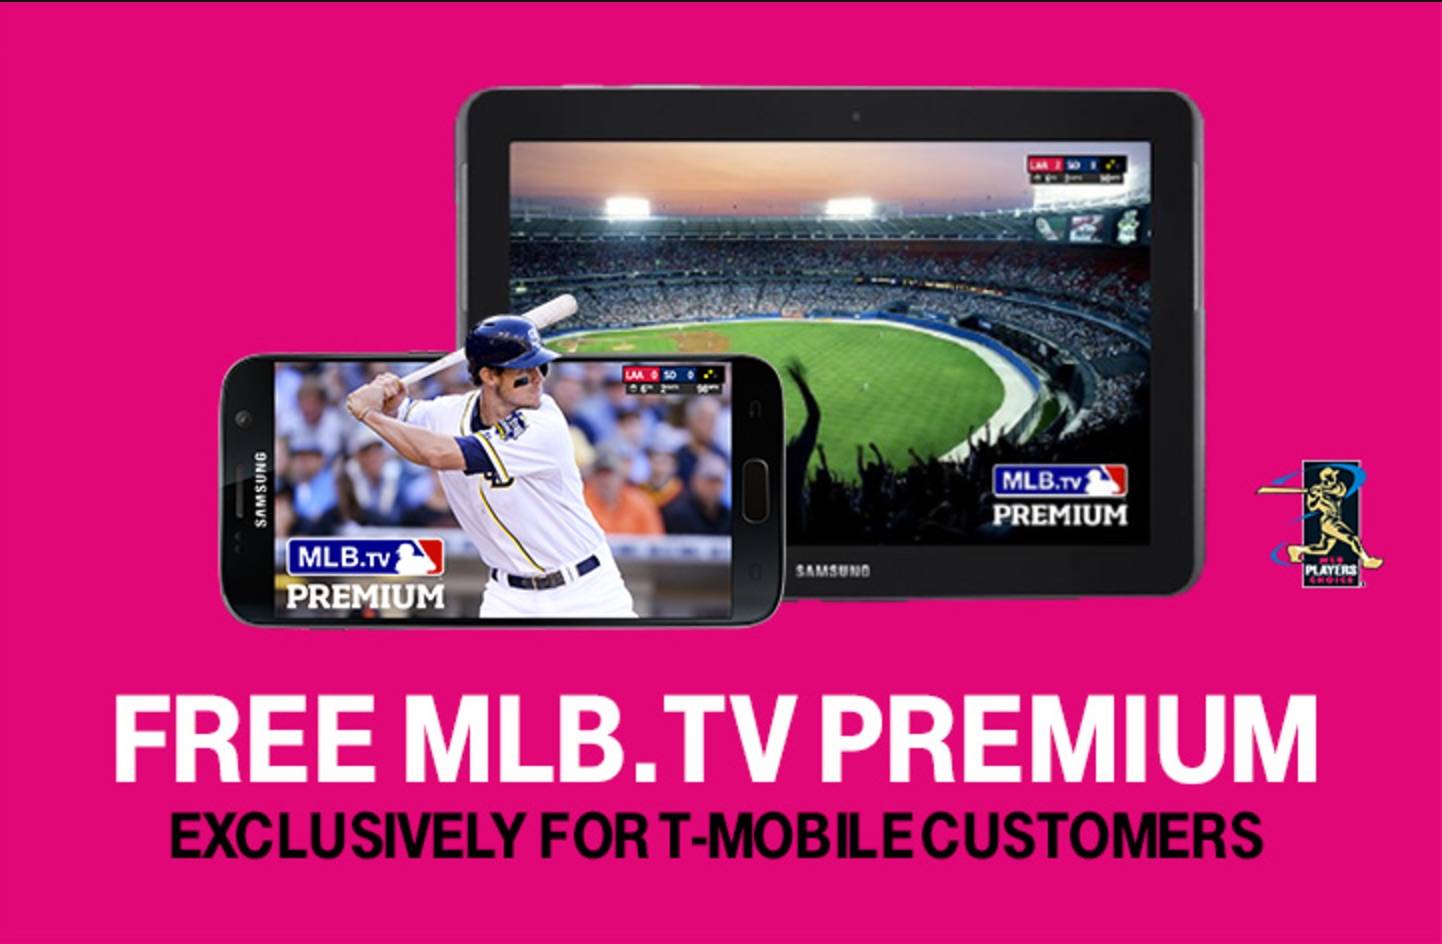 T-Mobile giving away free MLB Premium for Get Thanked Tuesday